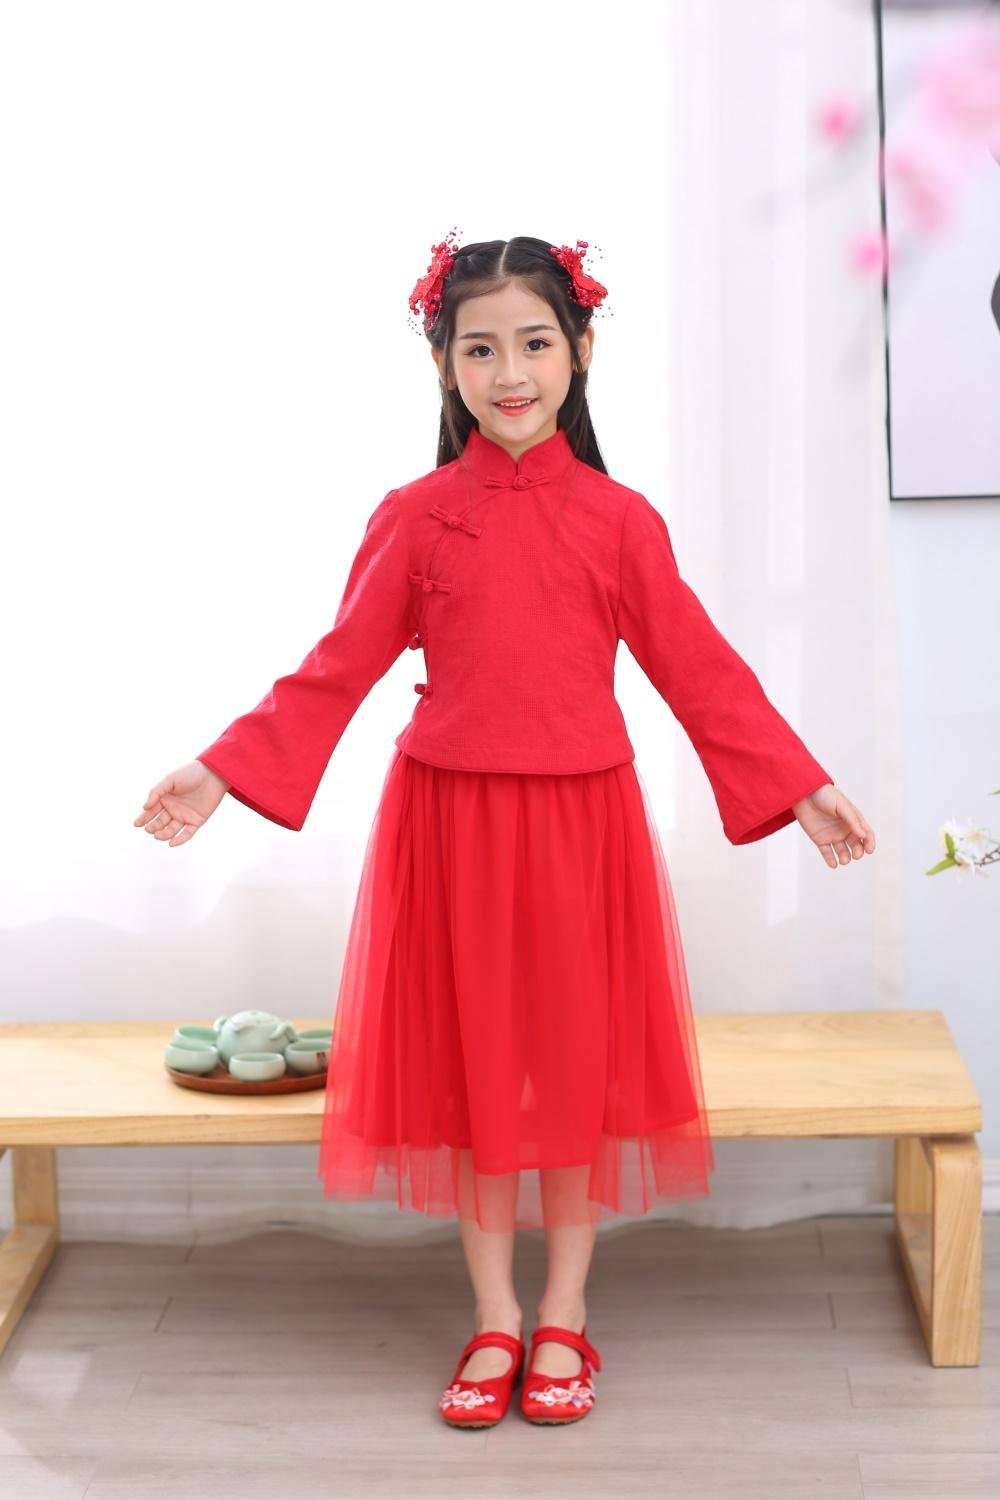 Hotsale wholesale Hanfu Chinese traditional embroidered clothing brithday party  3